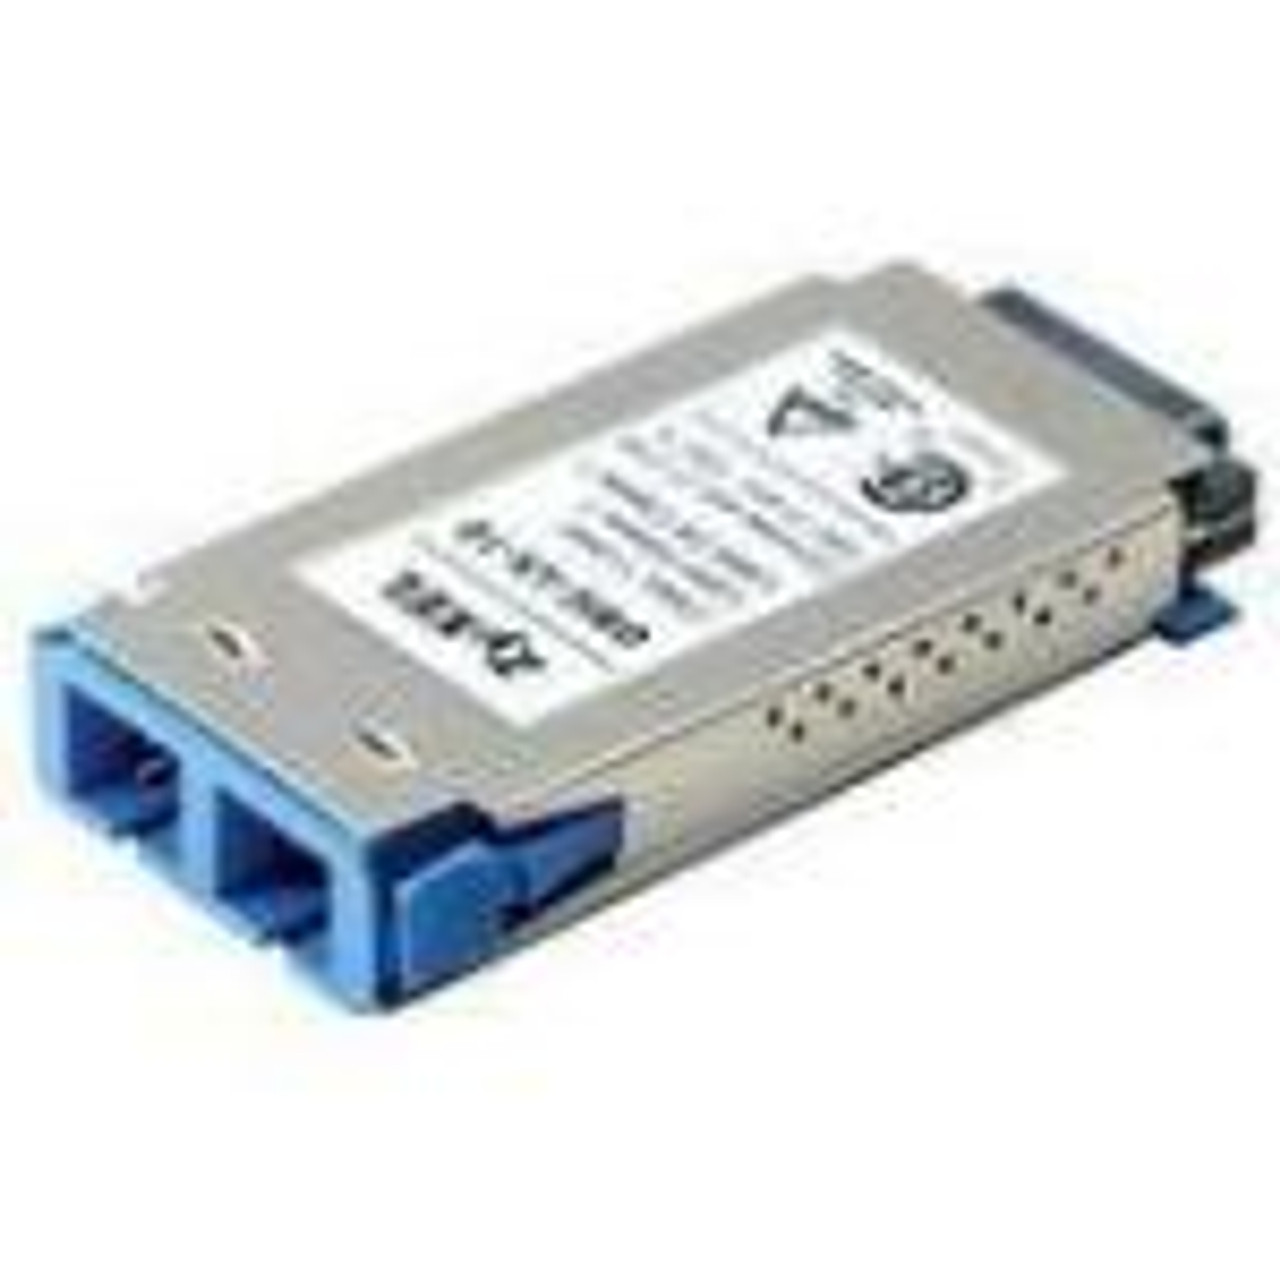 GBIC-LX-10 Zyxel 1.25Gbps 1000Base-LX Single-mode Fiber 10km 1310nm SC Connector GBIC Transceiver Module